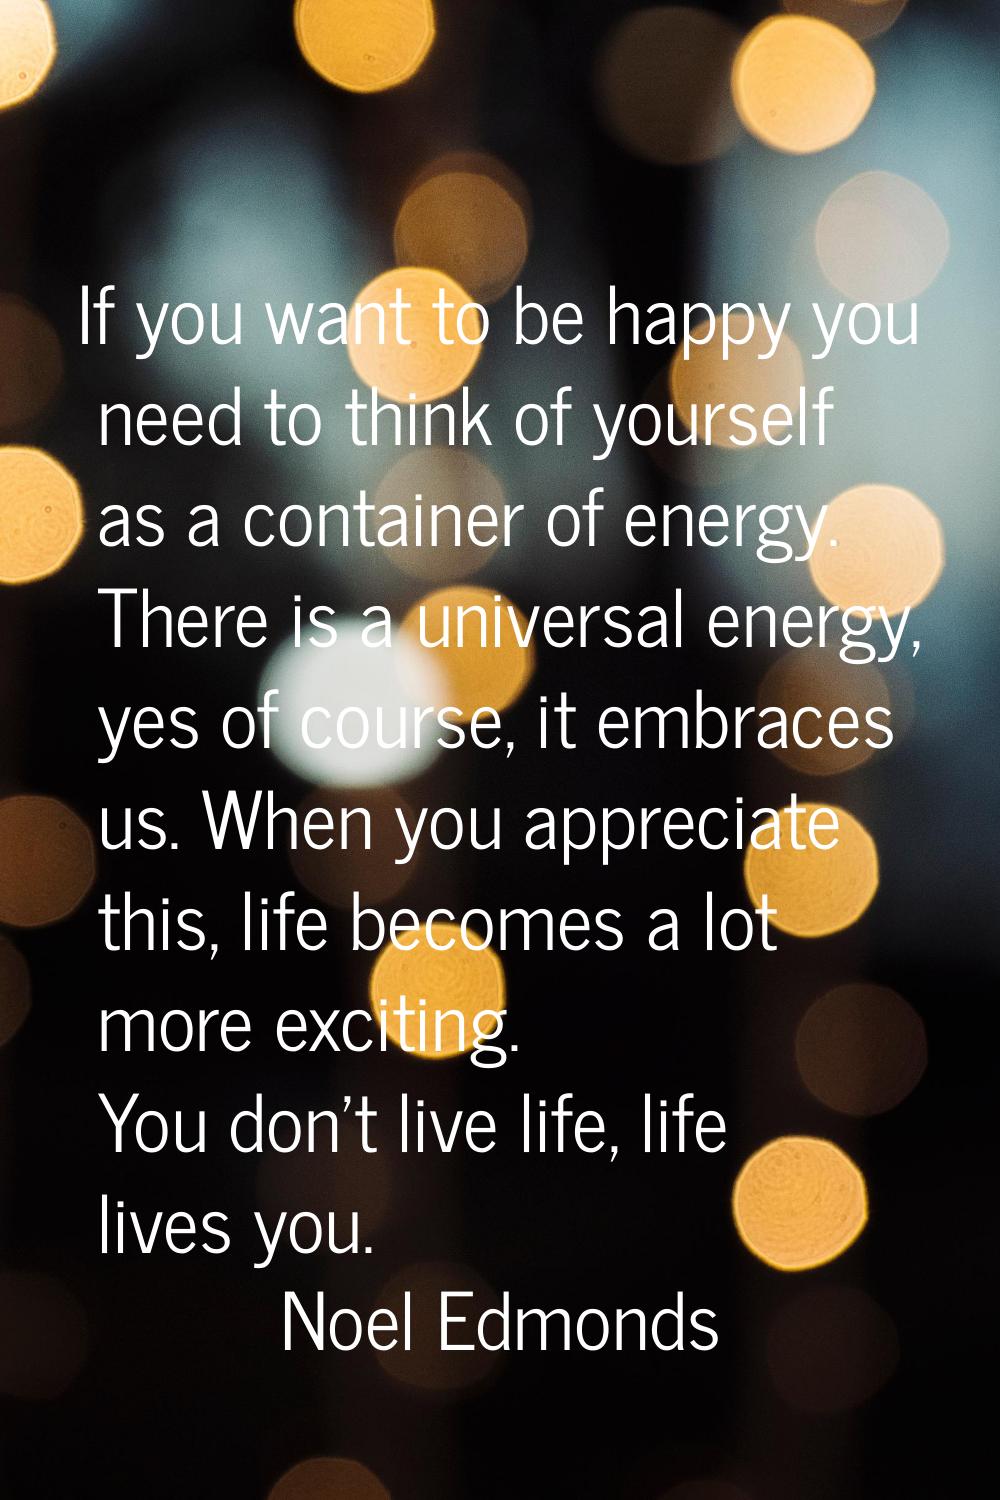 If you want to be happy you need to think of yourself as a container of energy. There is a universa